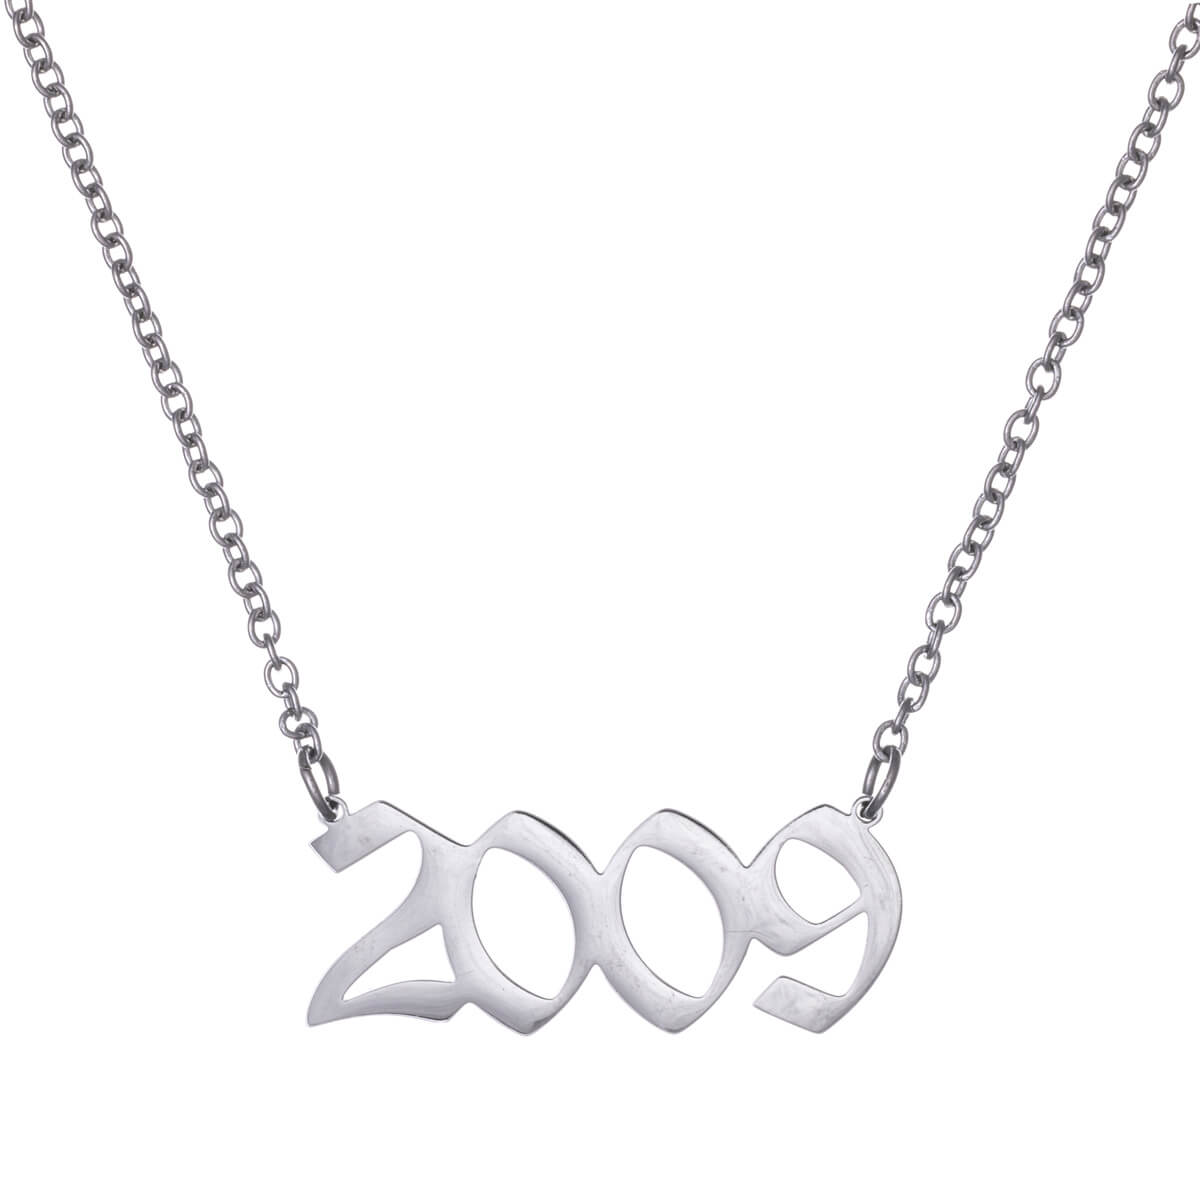 Year of birth necklace 54cm (Steel 316L)